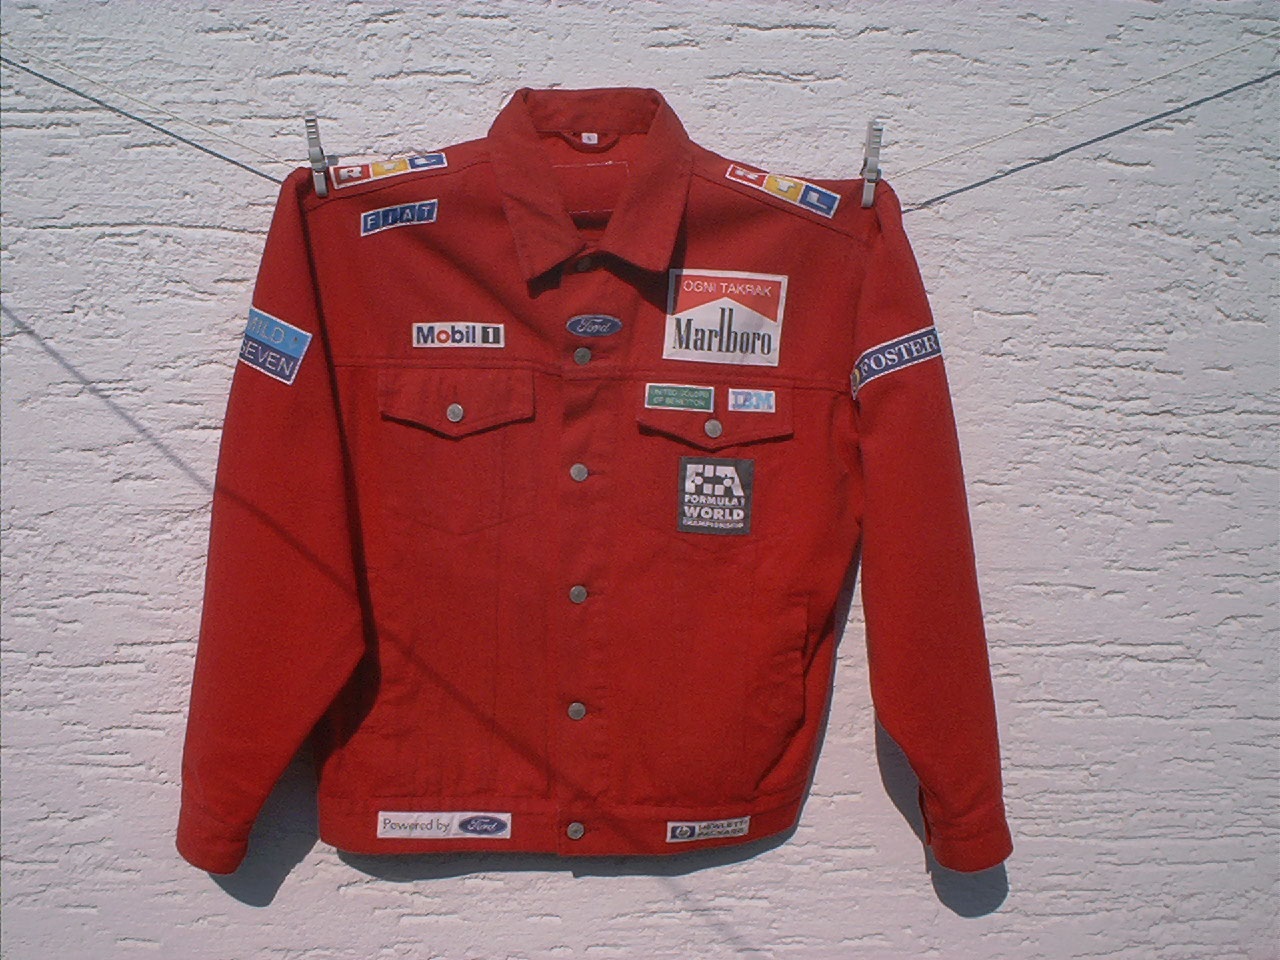 Schumi-jacke front.overview